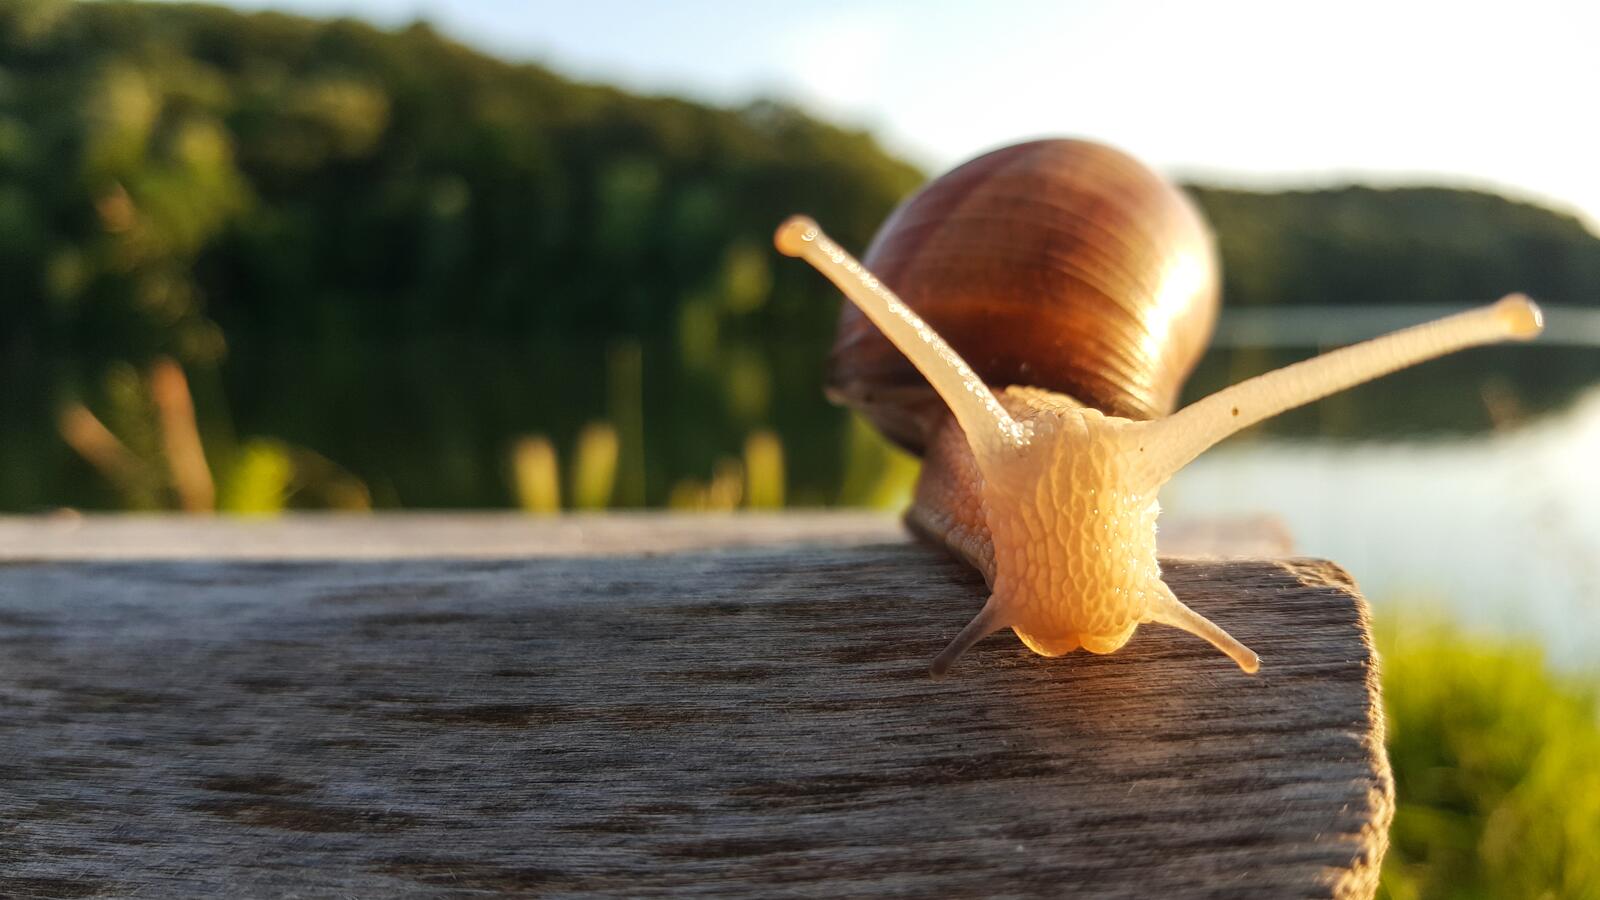 Free photo A snail crawls on a wooden surface